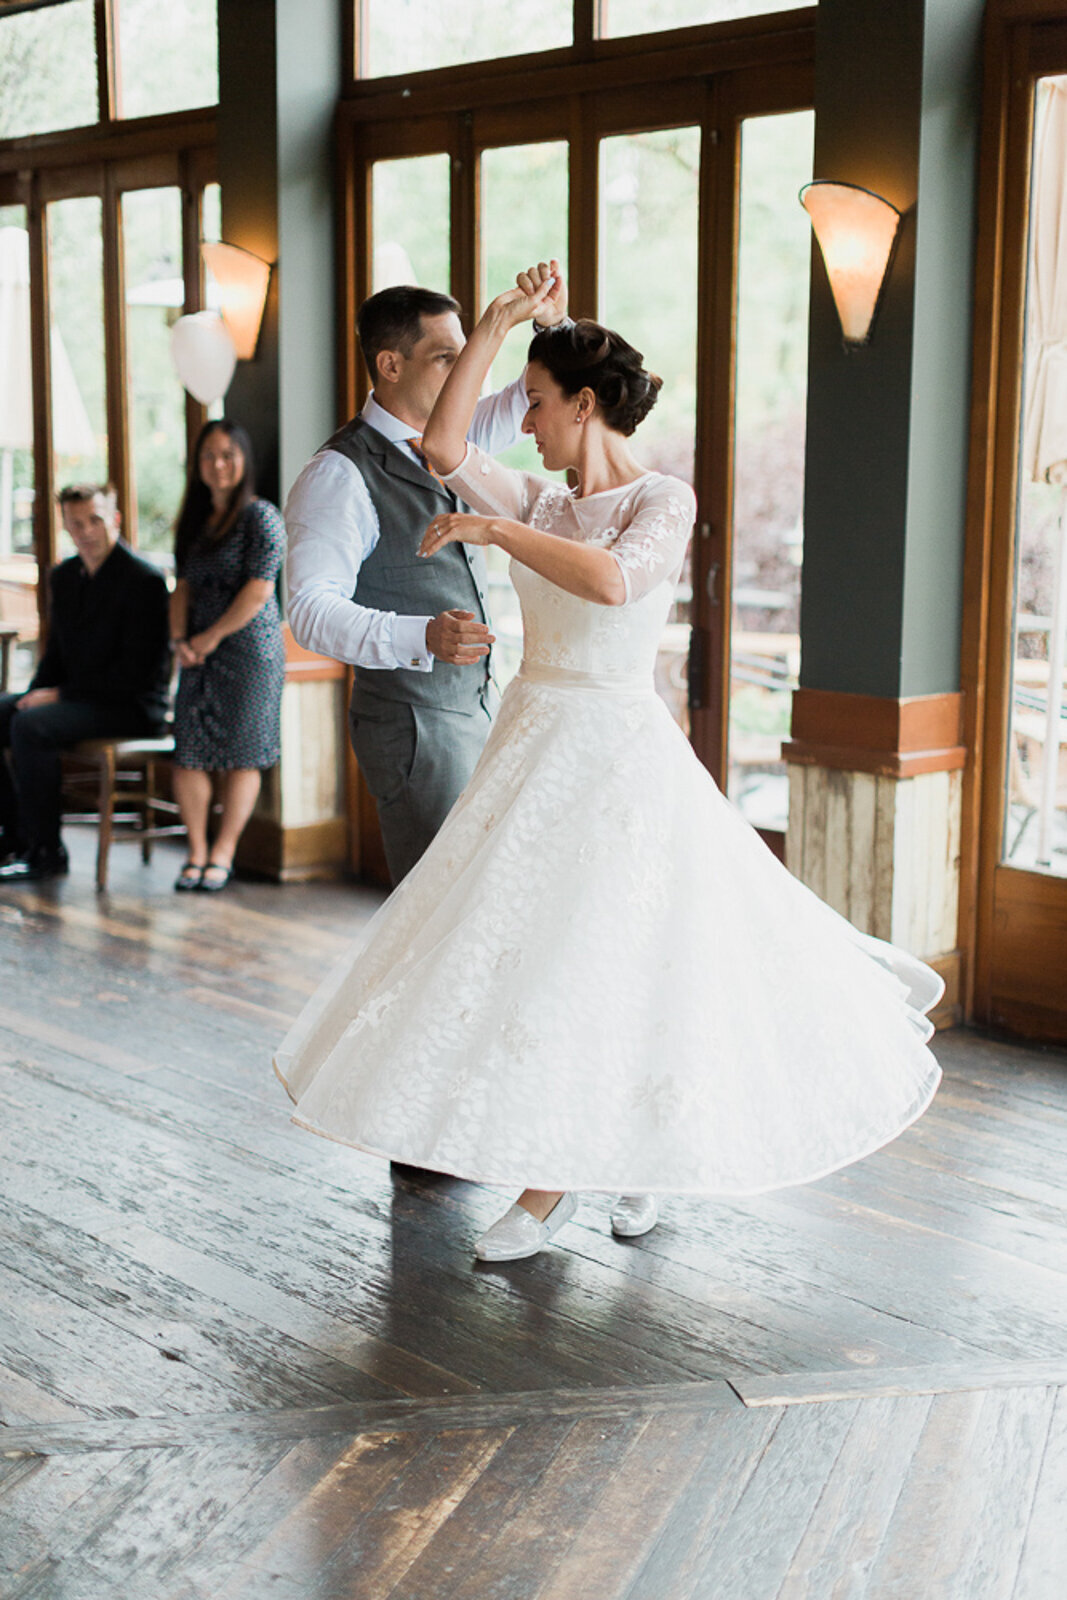 Bride and groom dancing at River Cafe, a riverside wedding venue in downtown Calgary, featured on the Brontë Bride Vendor Guide.